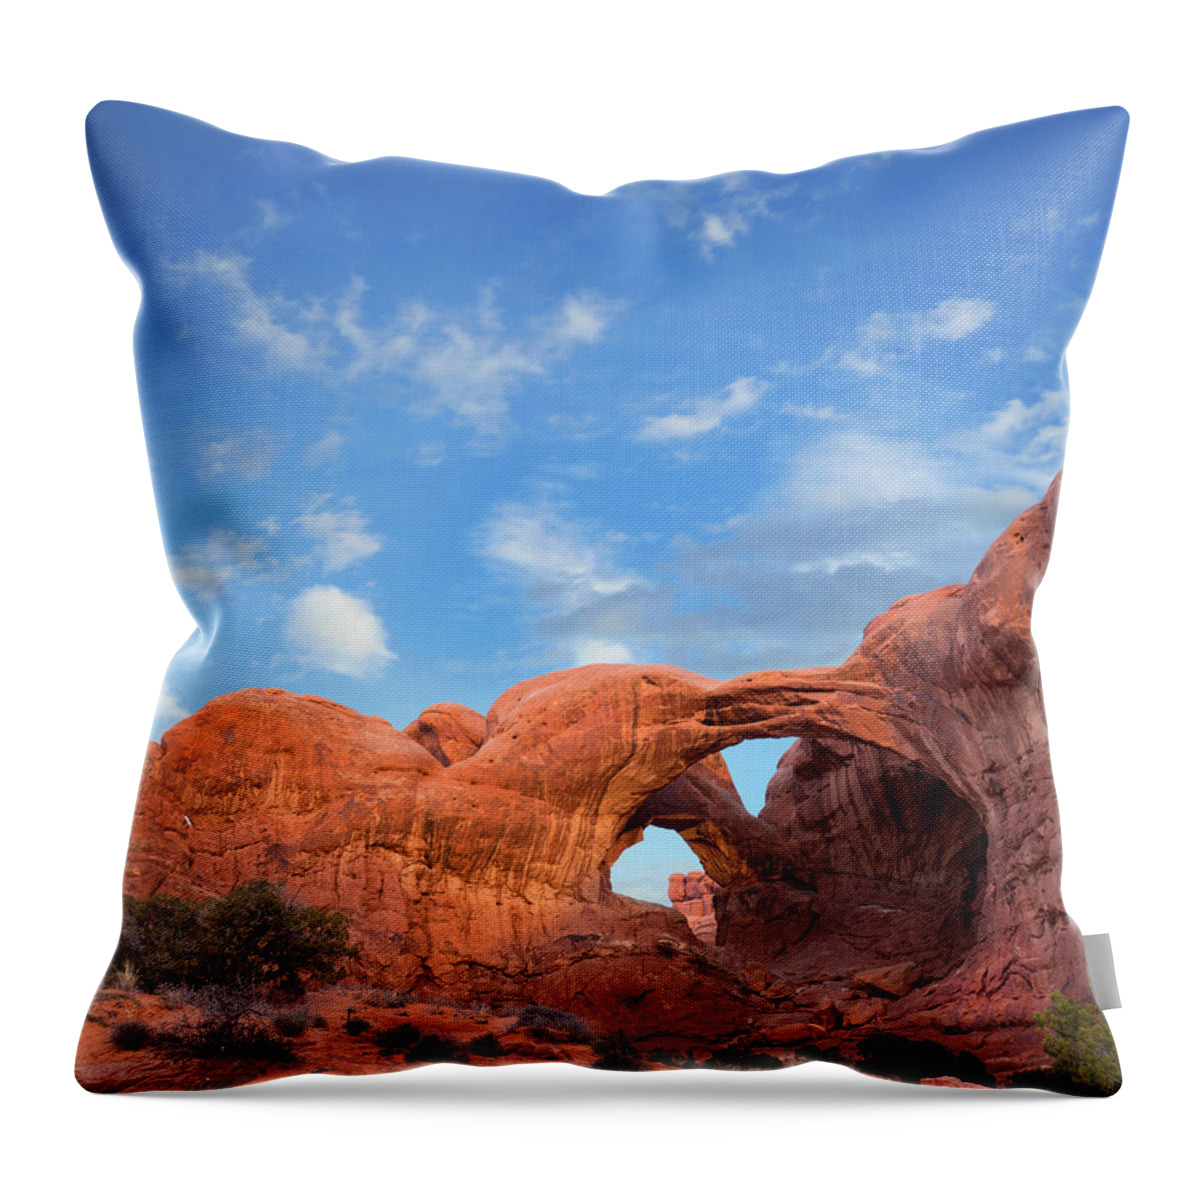 00565367 Throw Pillow featuring the photograph Double Arch, Arches National Park, Utah #1 by Tim Fitzharris